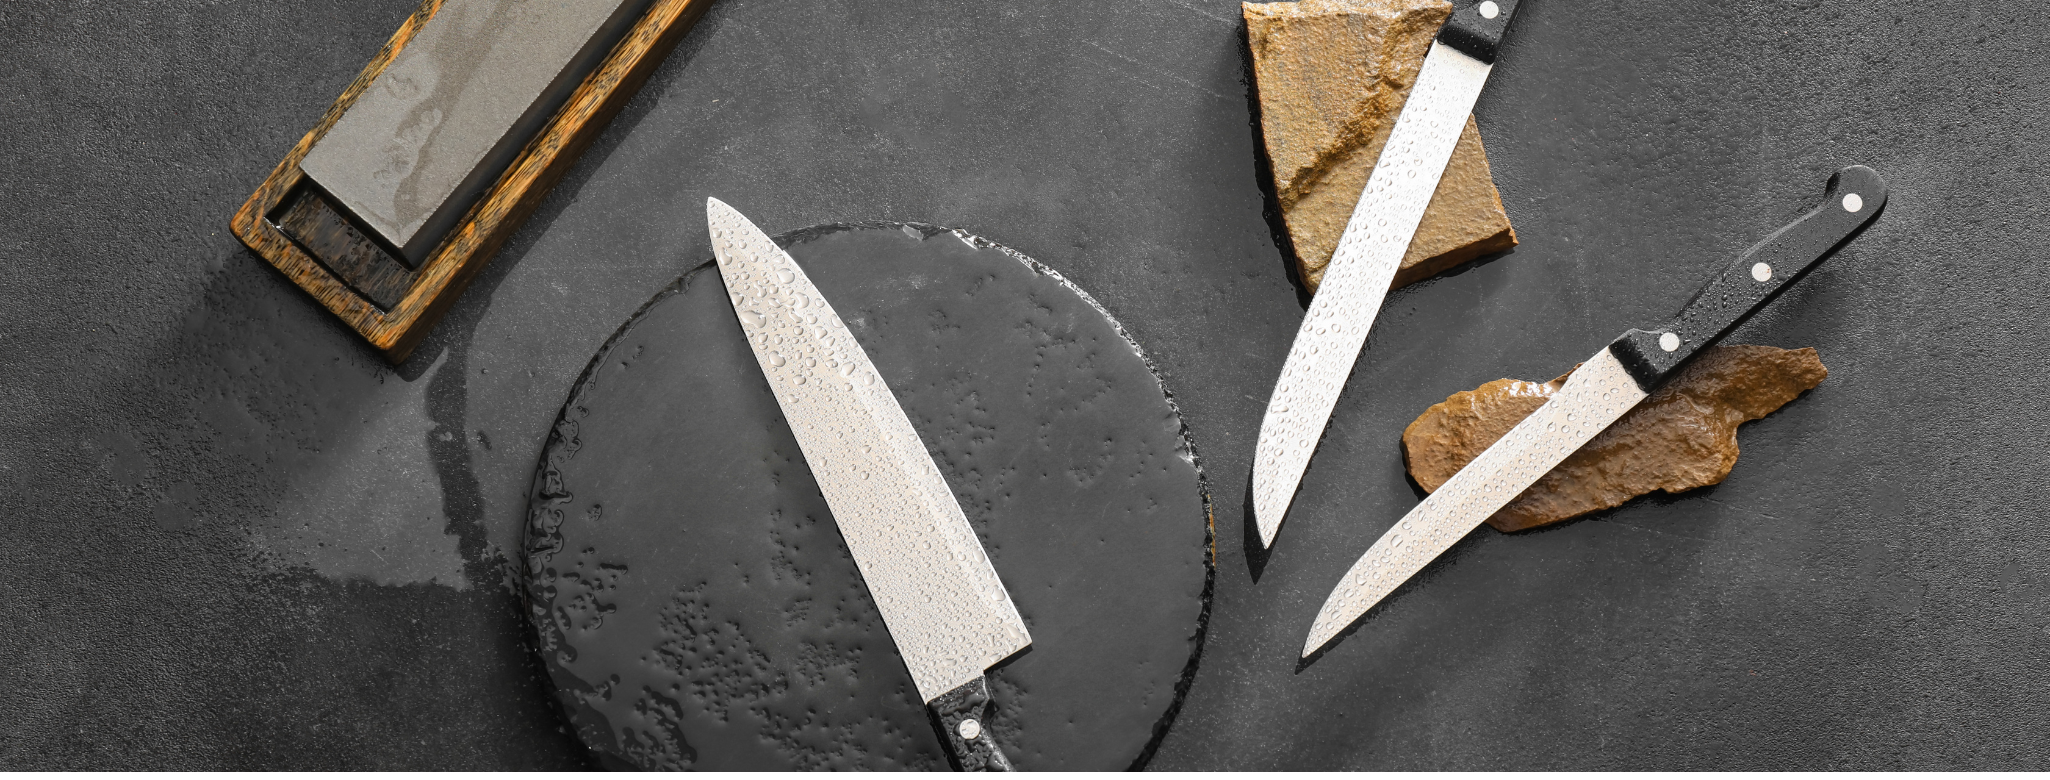 Mastering The Rhythm of Knife Sharpening: When and How Often to Use a Sharpening Stone